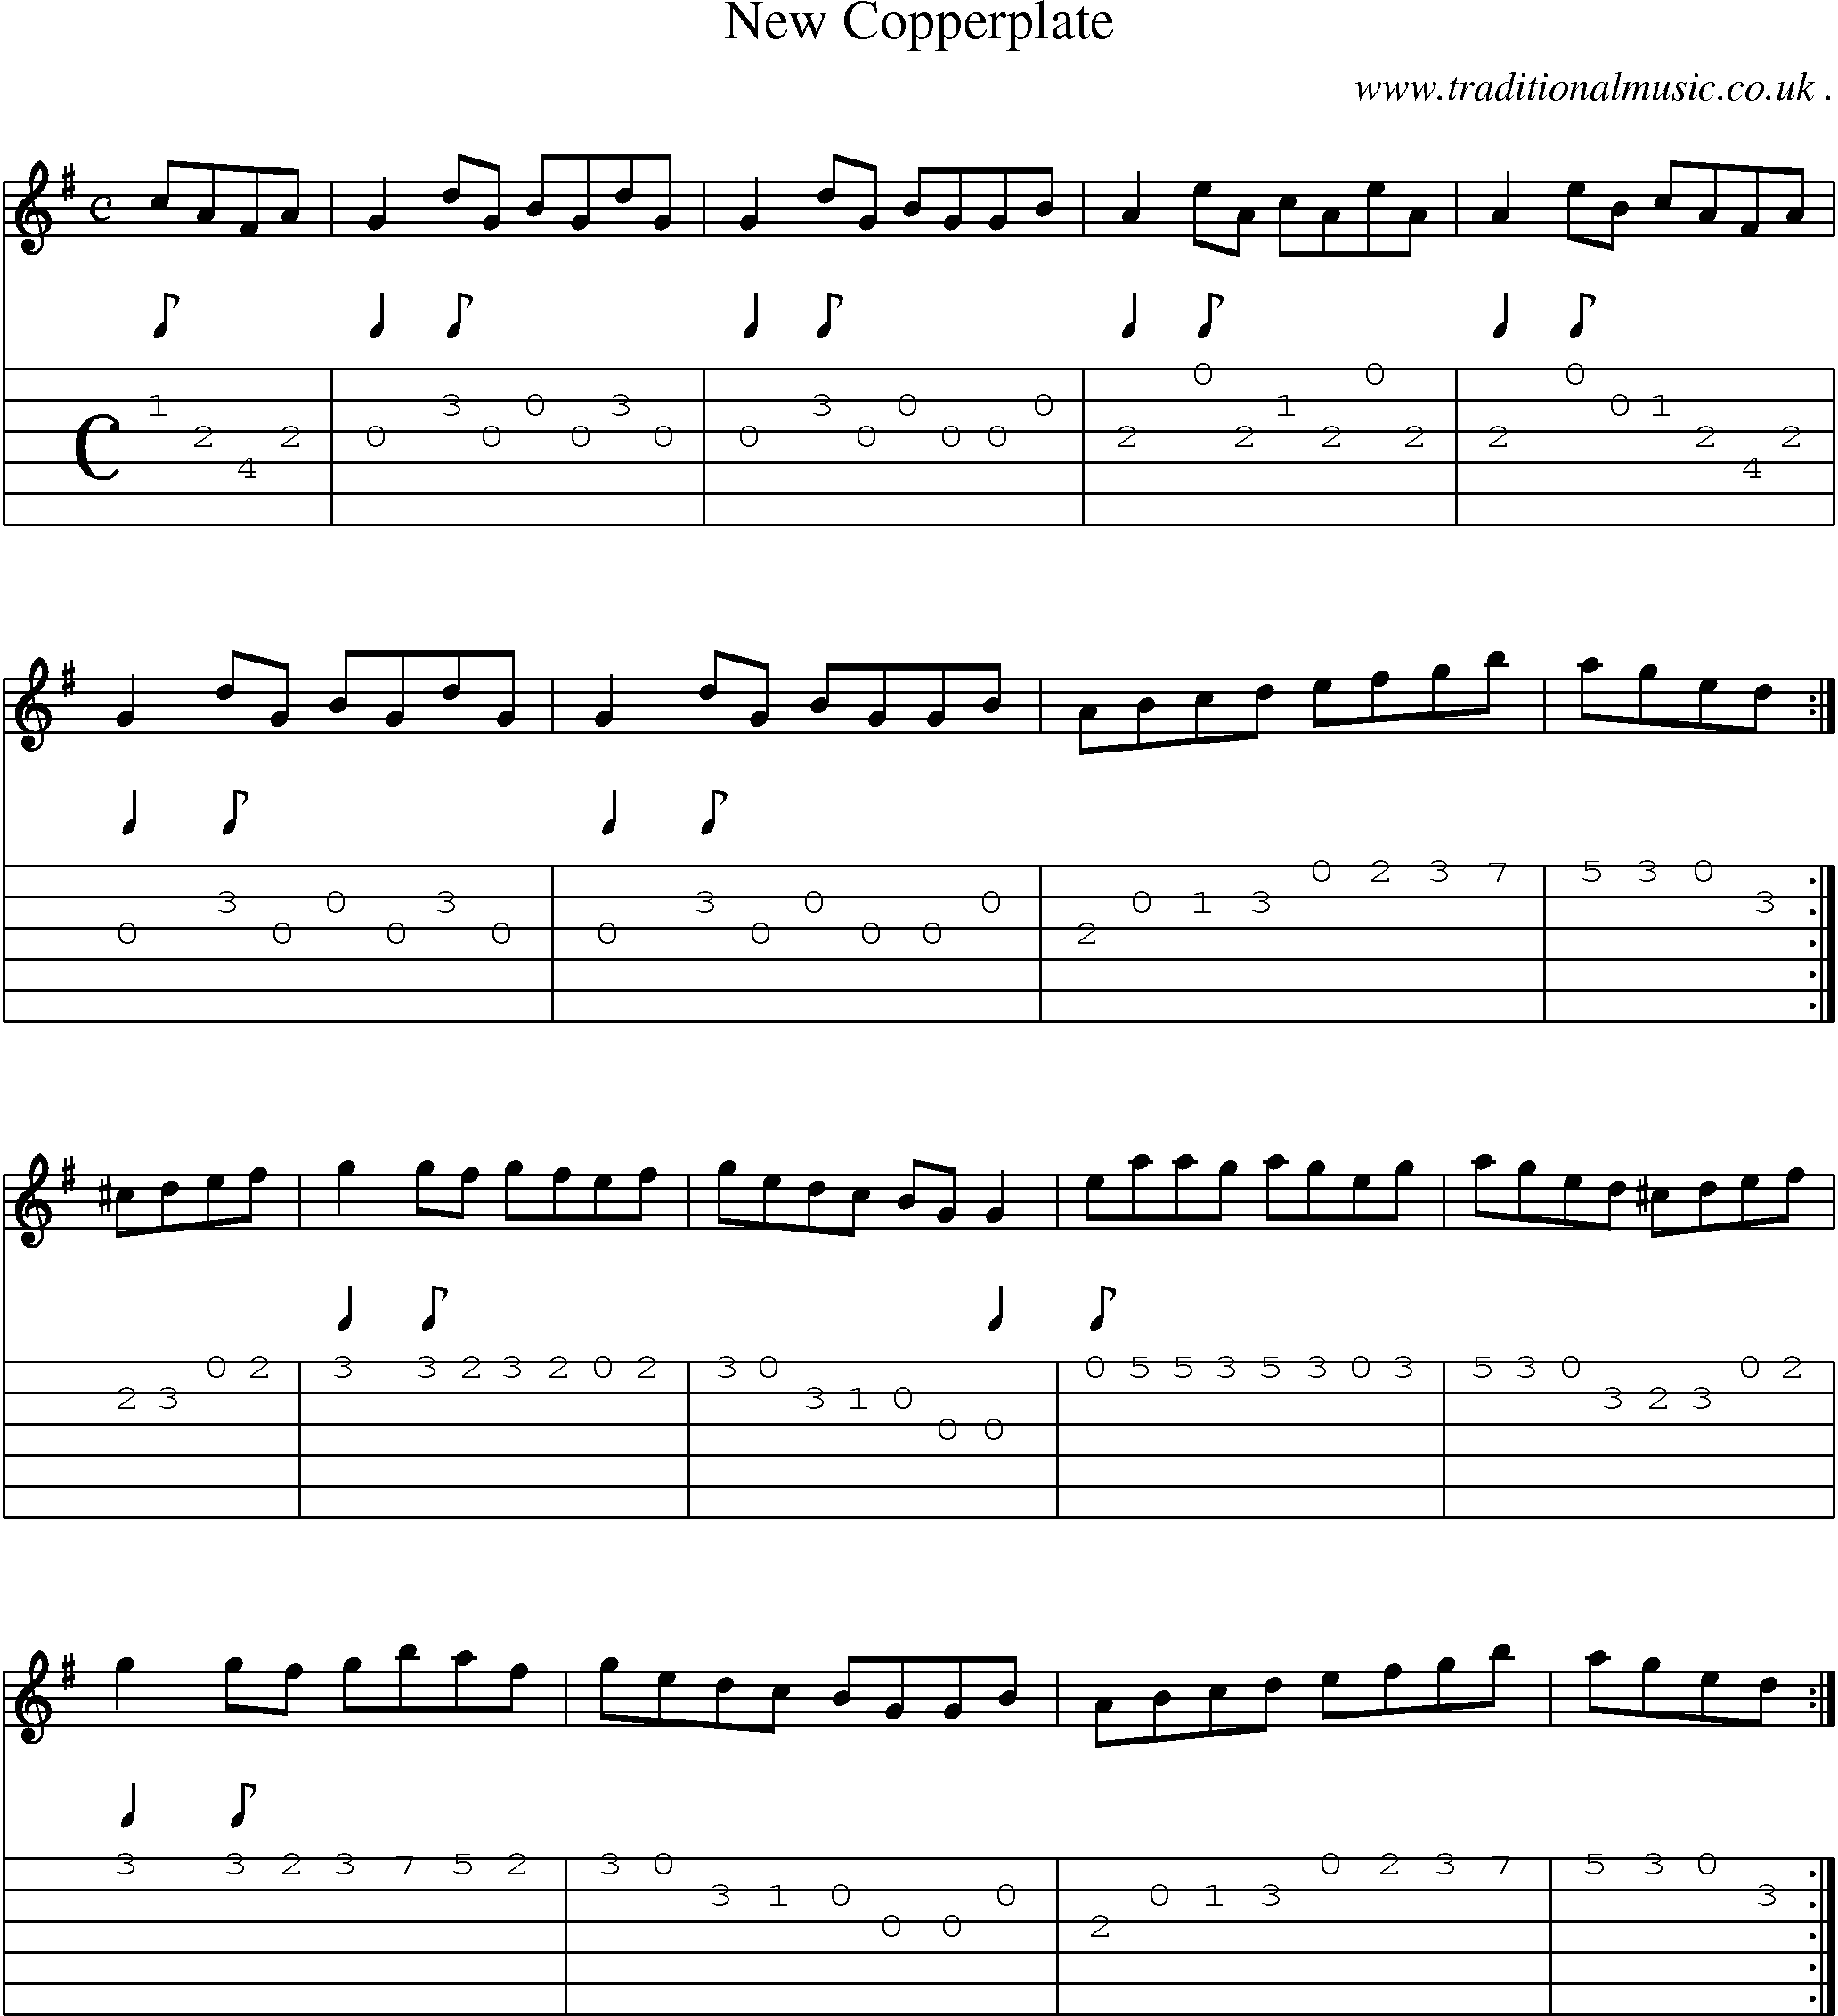 Sheet-Music and Guitar Tabs for New Copperplate